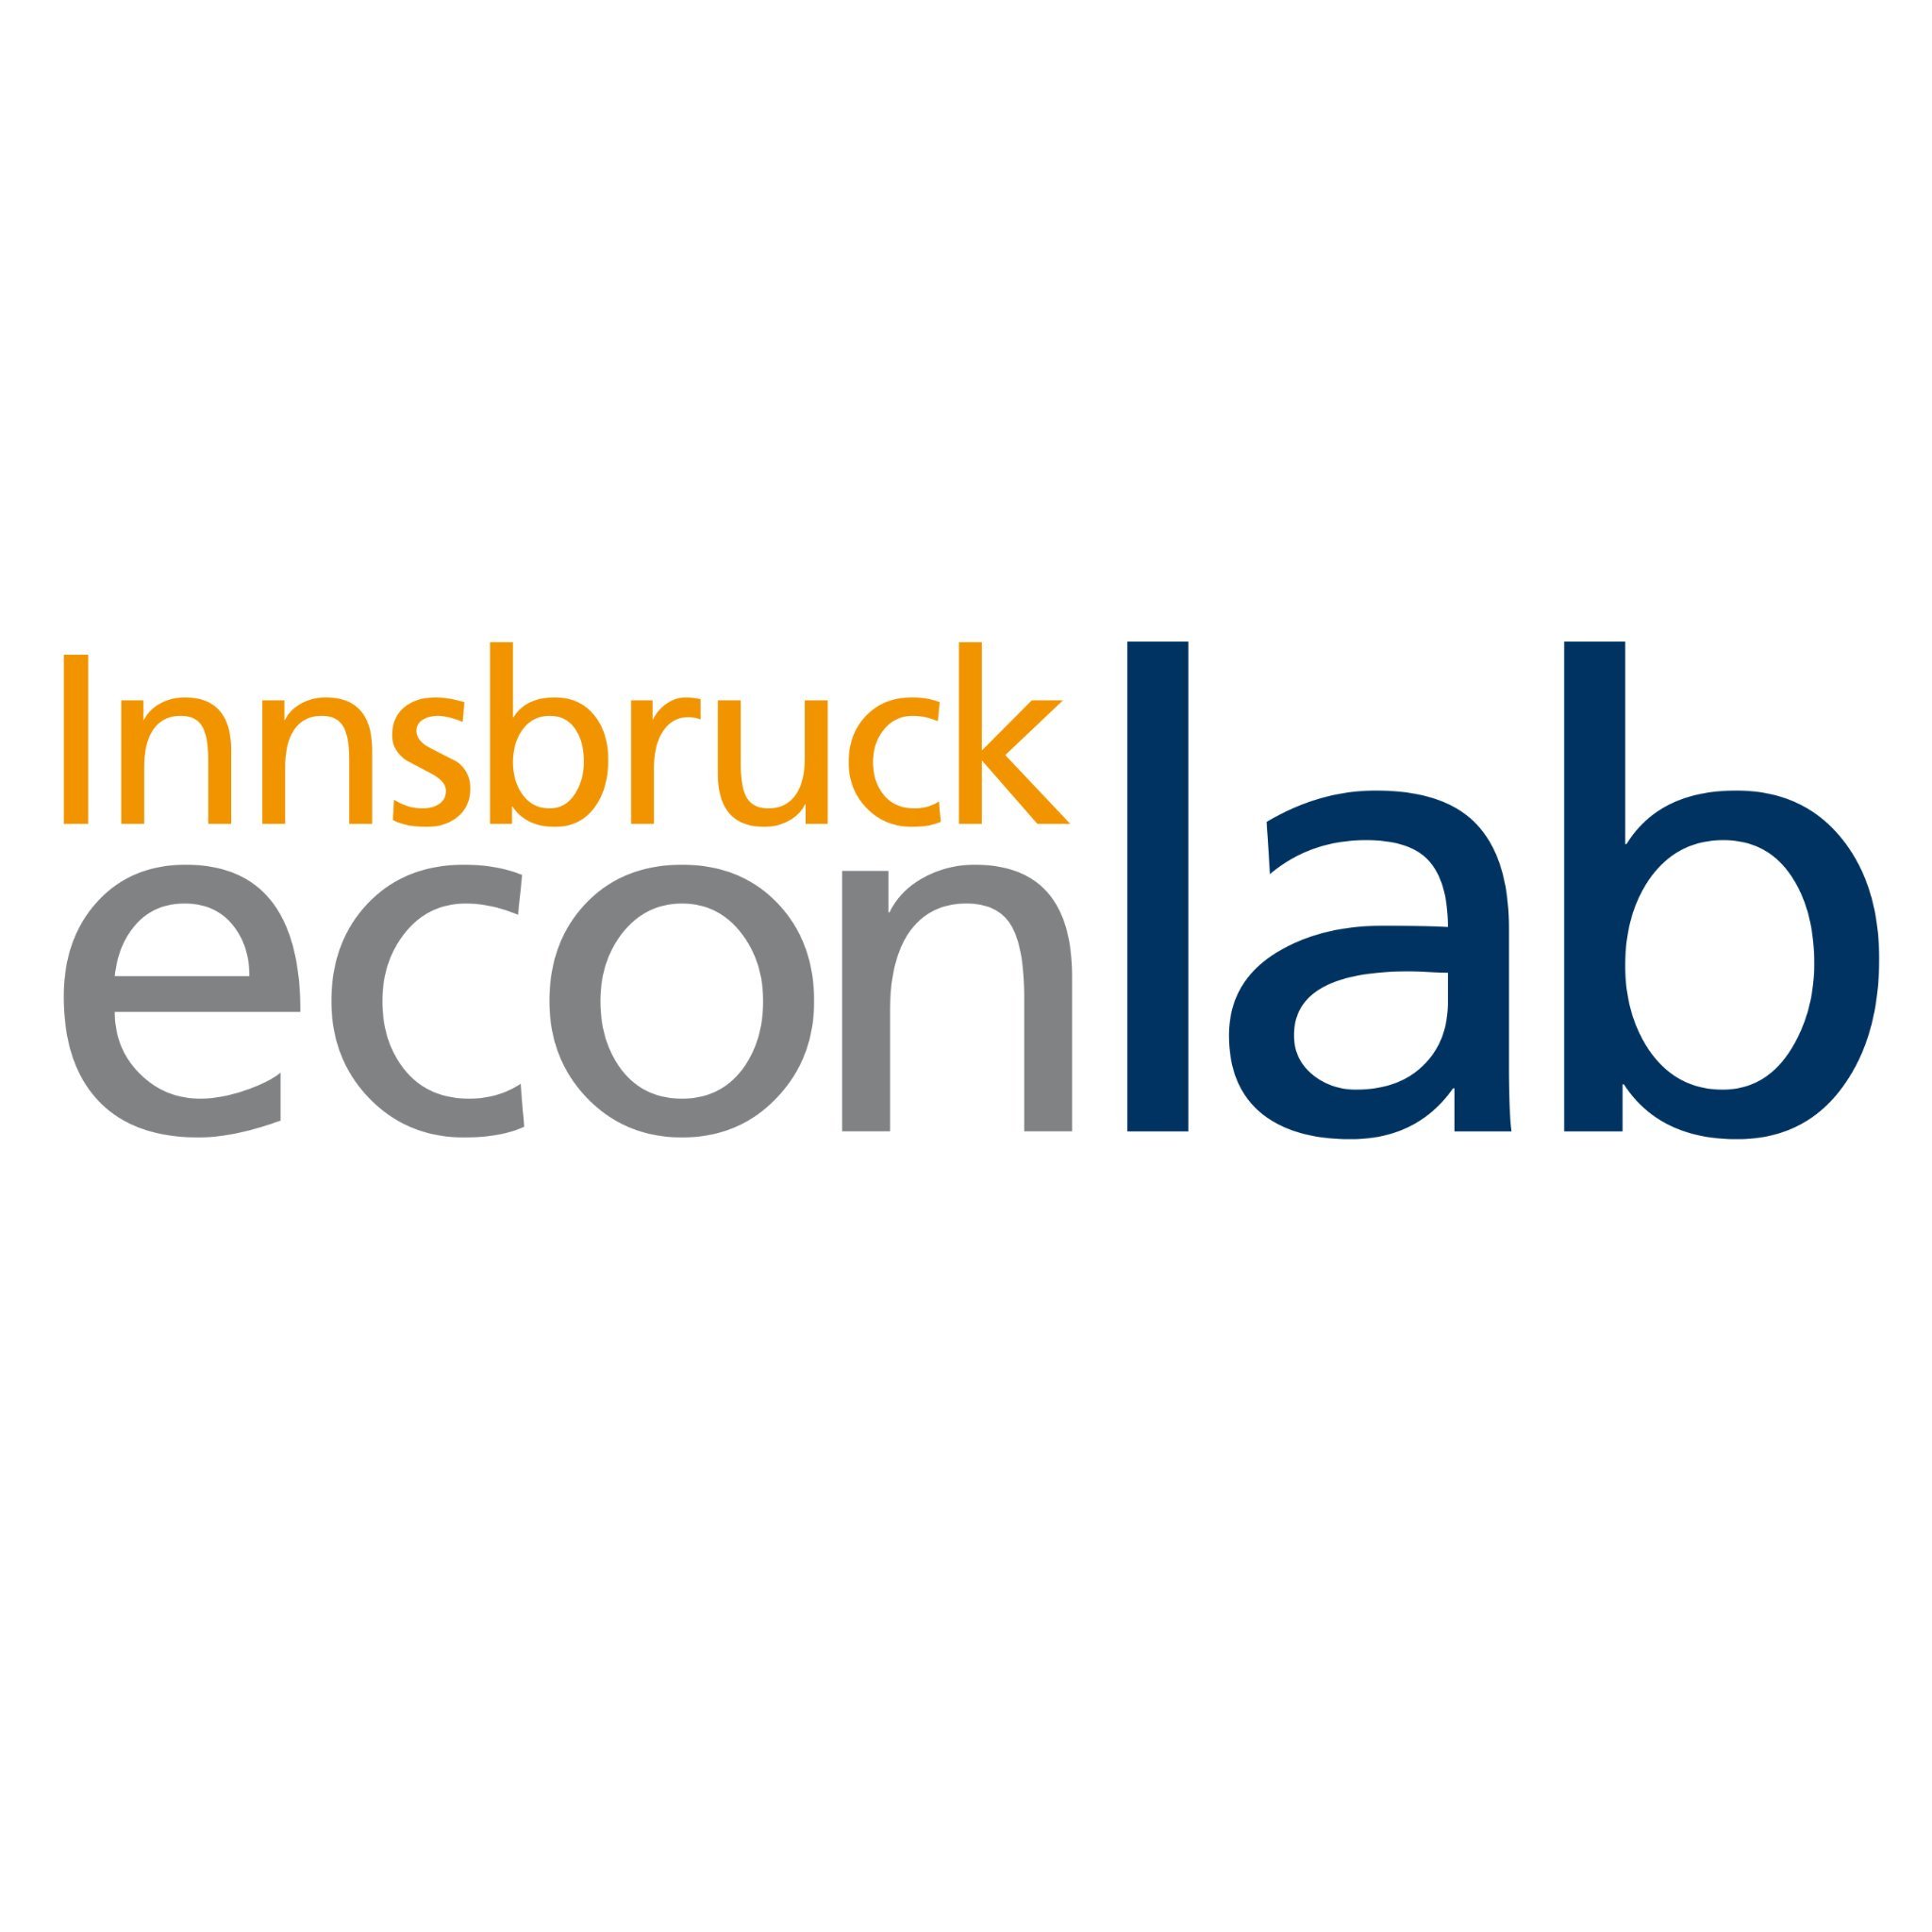 The Innsbruck EconLab is a laboratory for research in experimental economics at the University of Innsbruck.